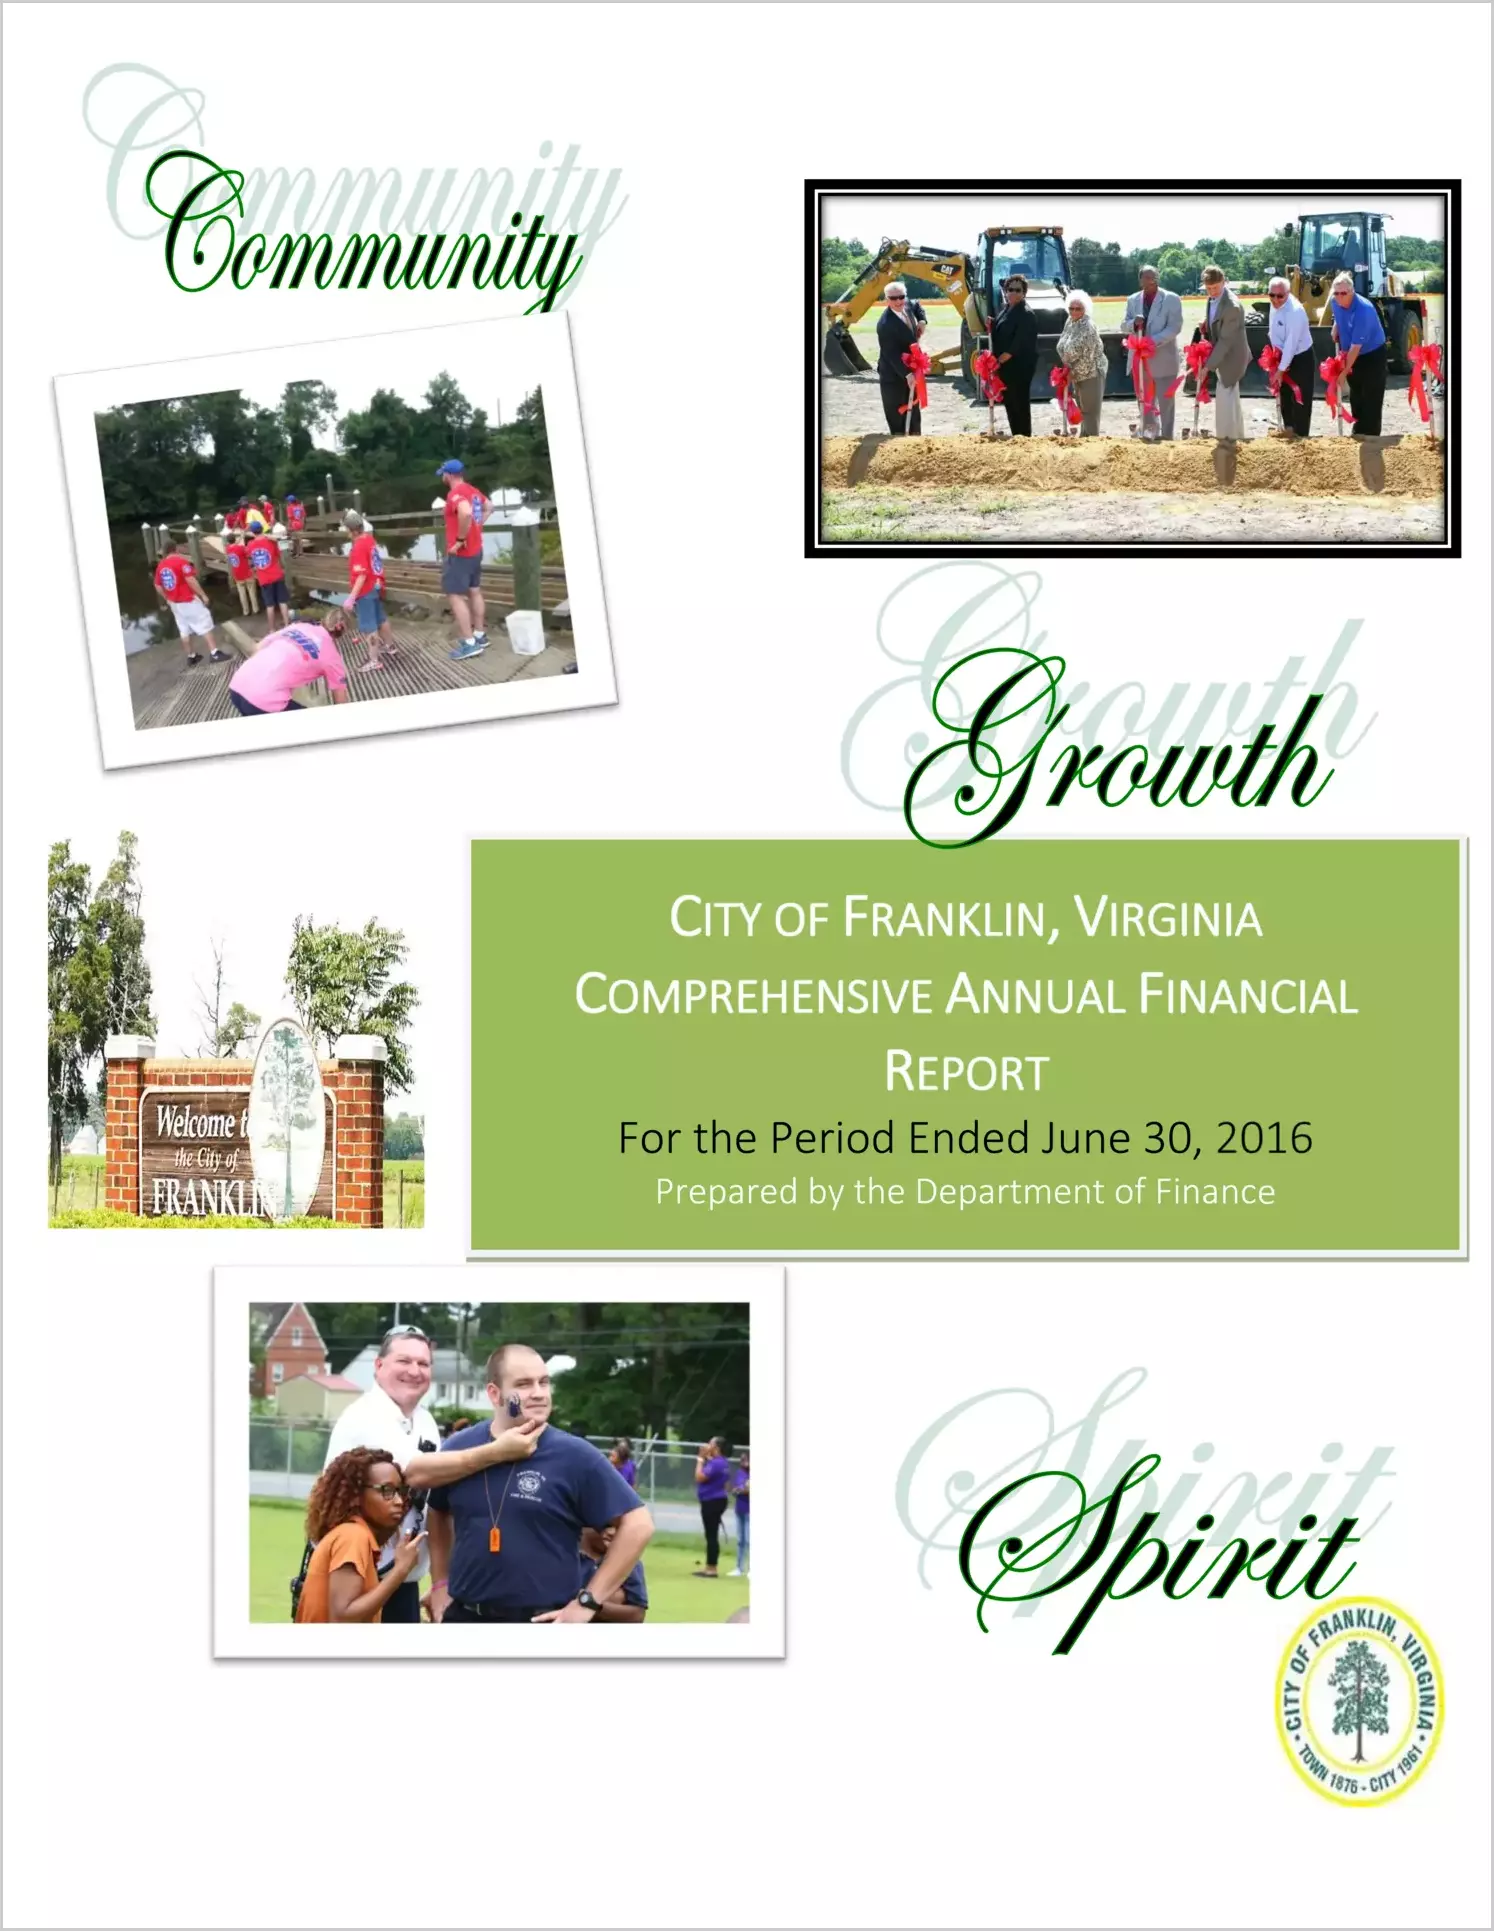 2016 Annual Financial Report for City of Franklin